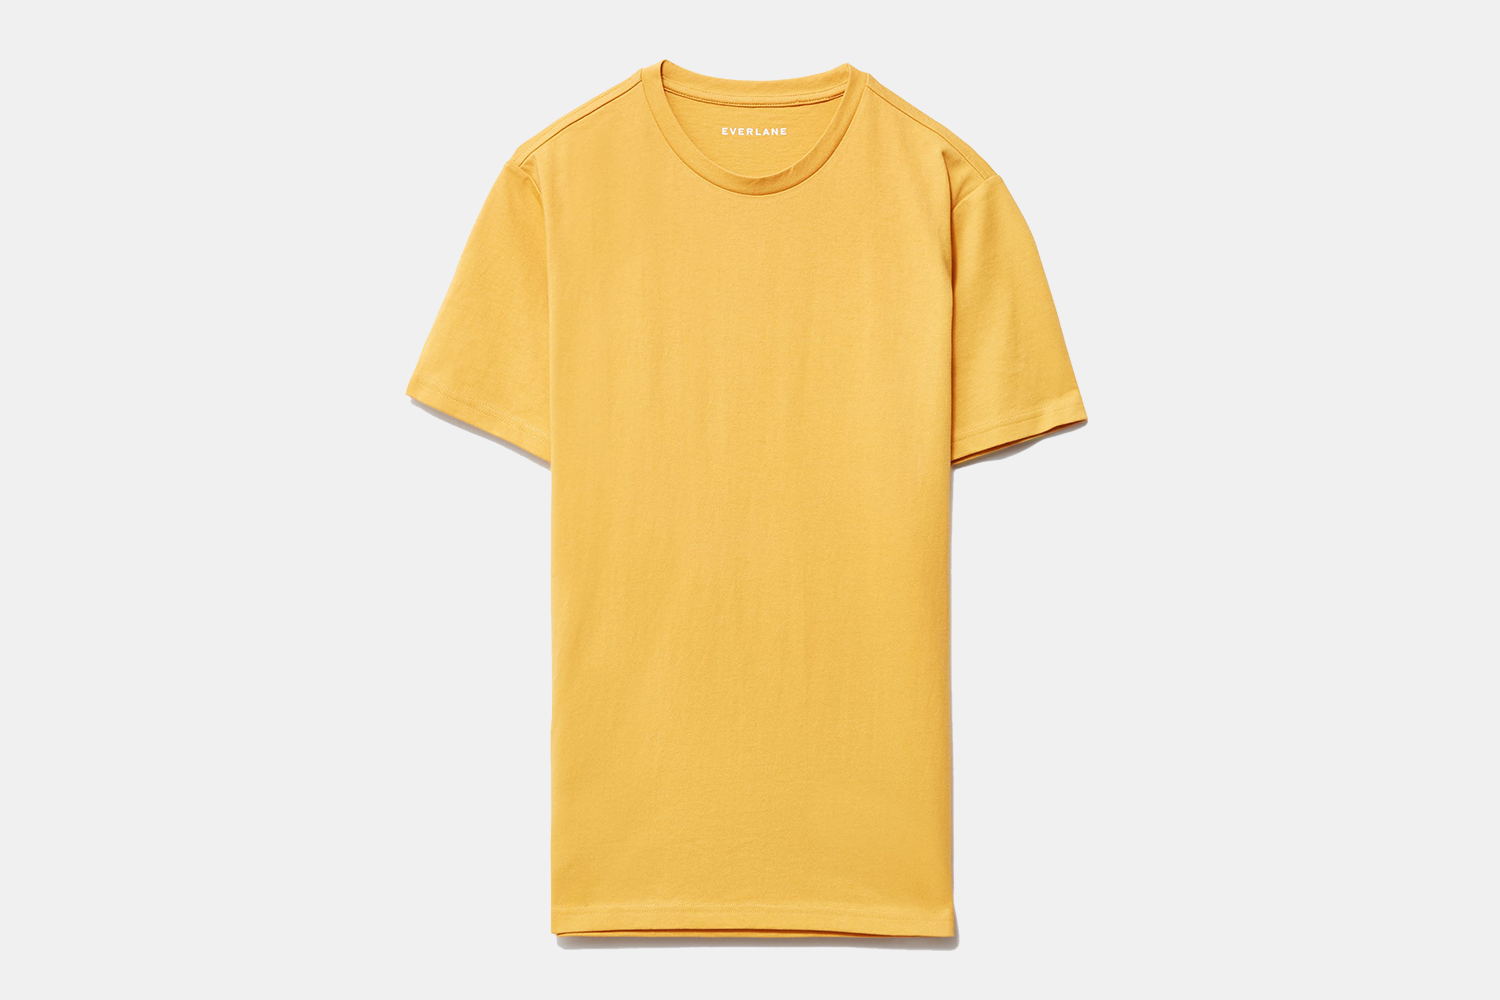 The men's Premium Weight Crew T-Shirt from Everlane in yellow on a grey background